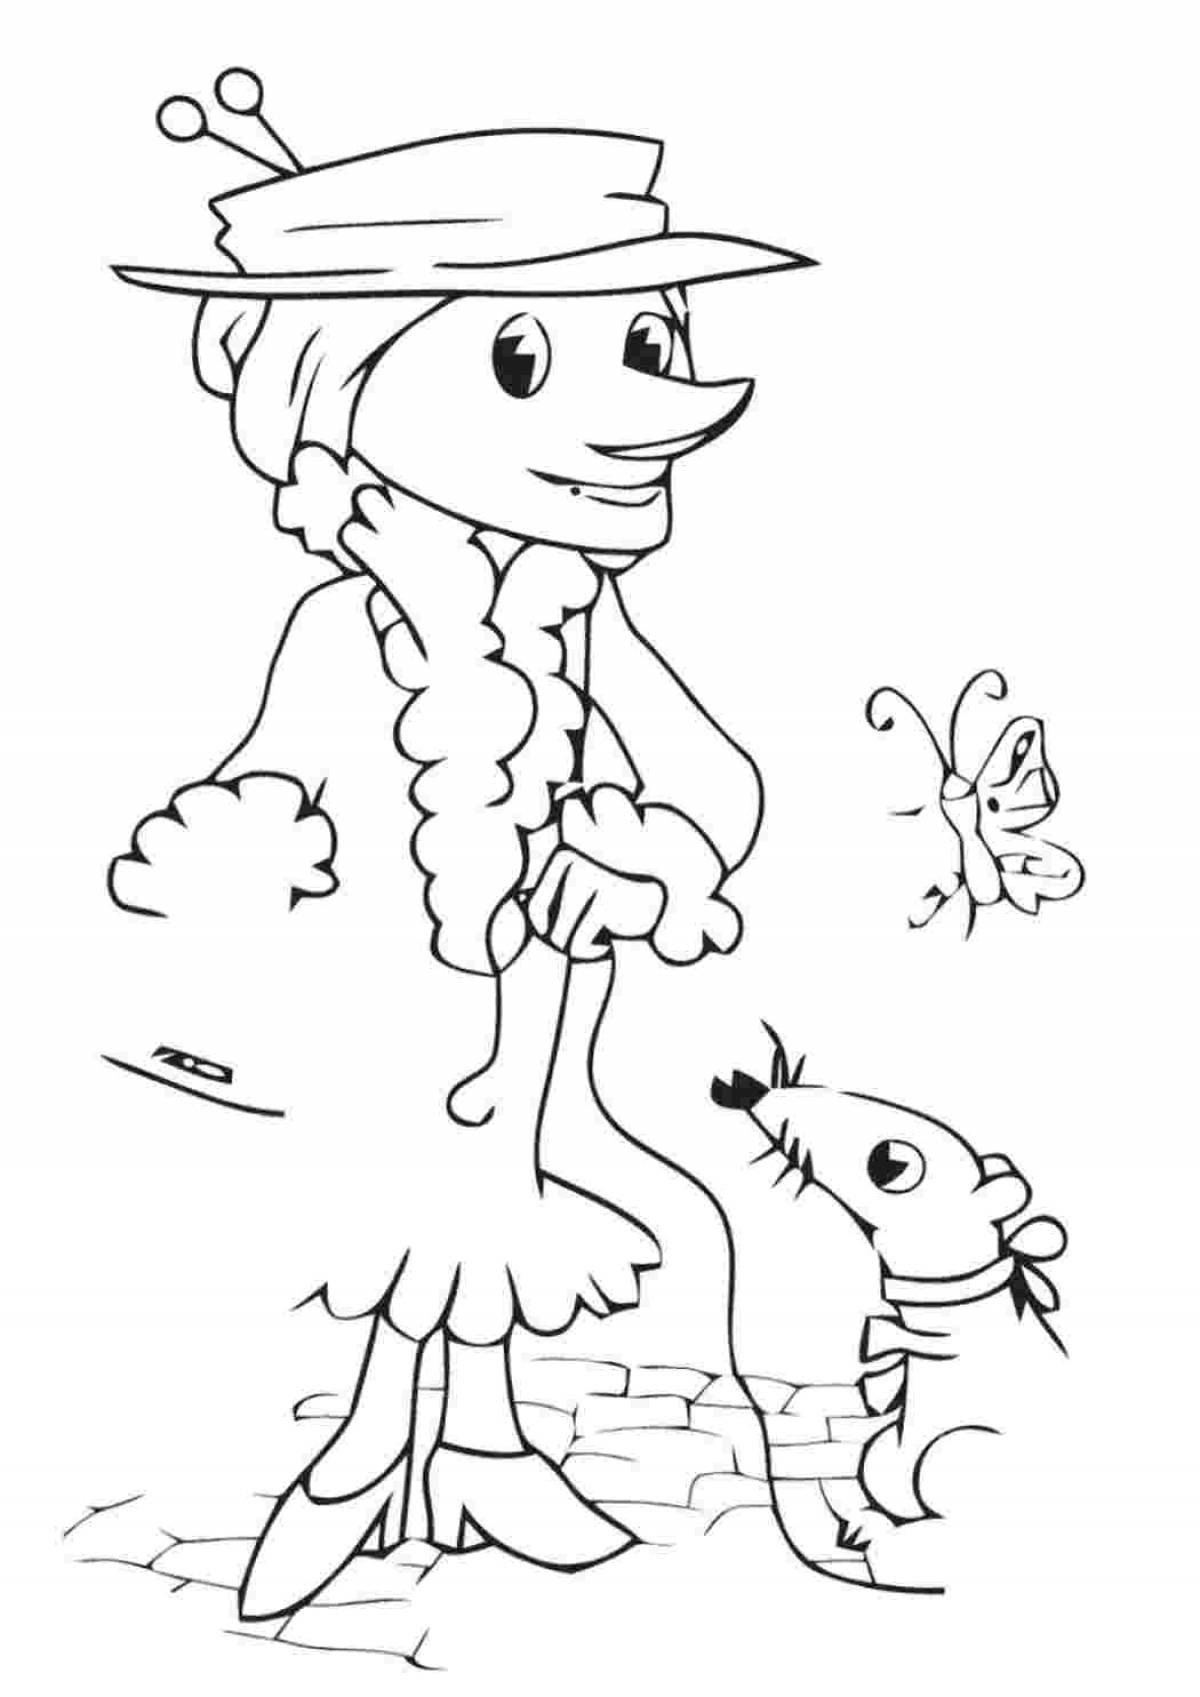 Coloring page beautiful hat for schoolchildren